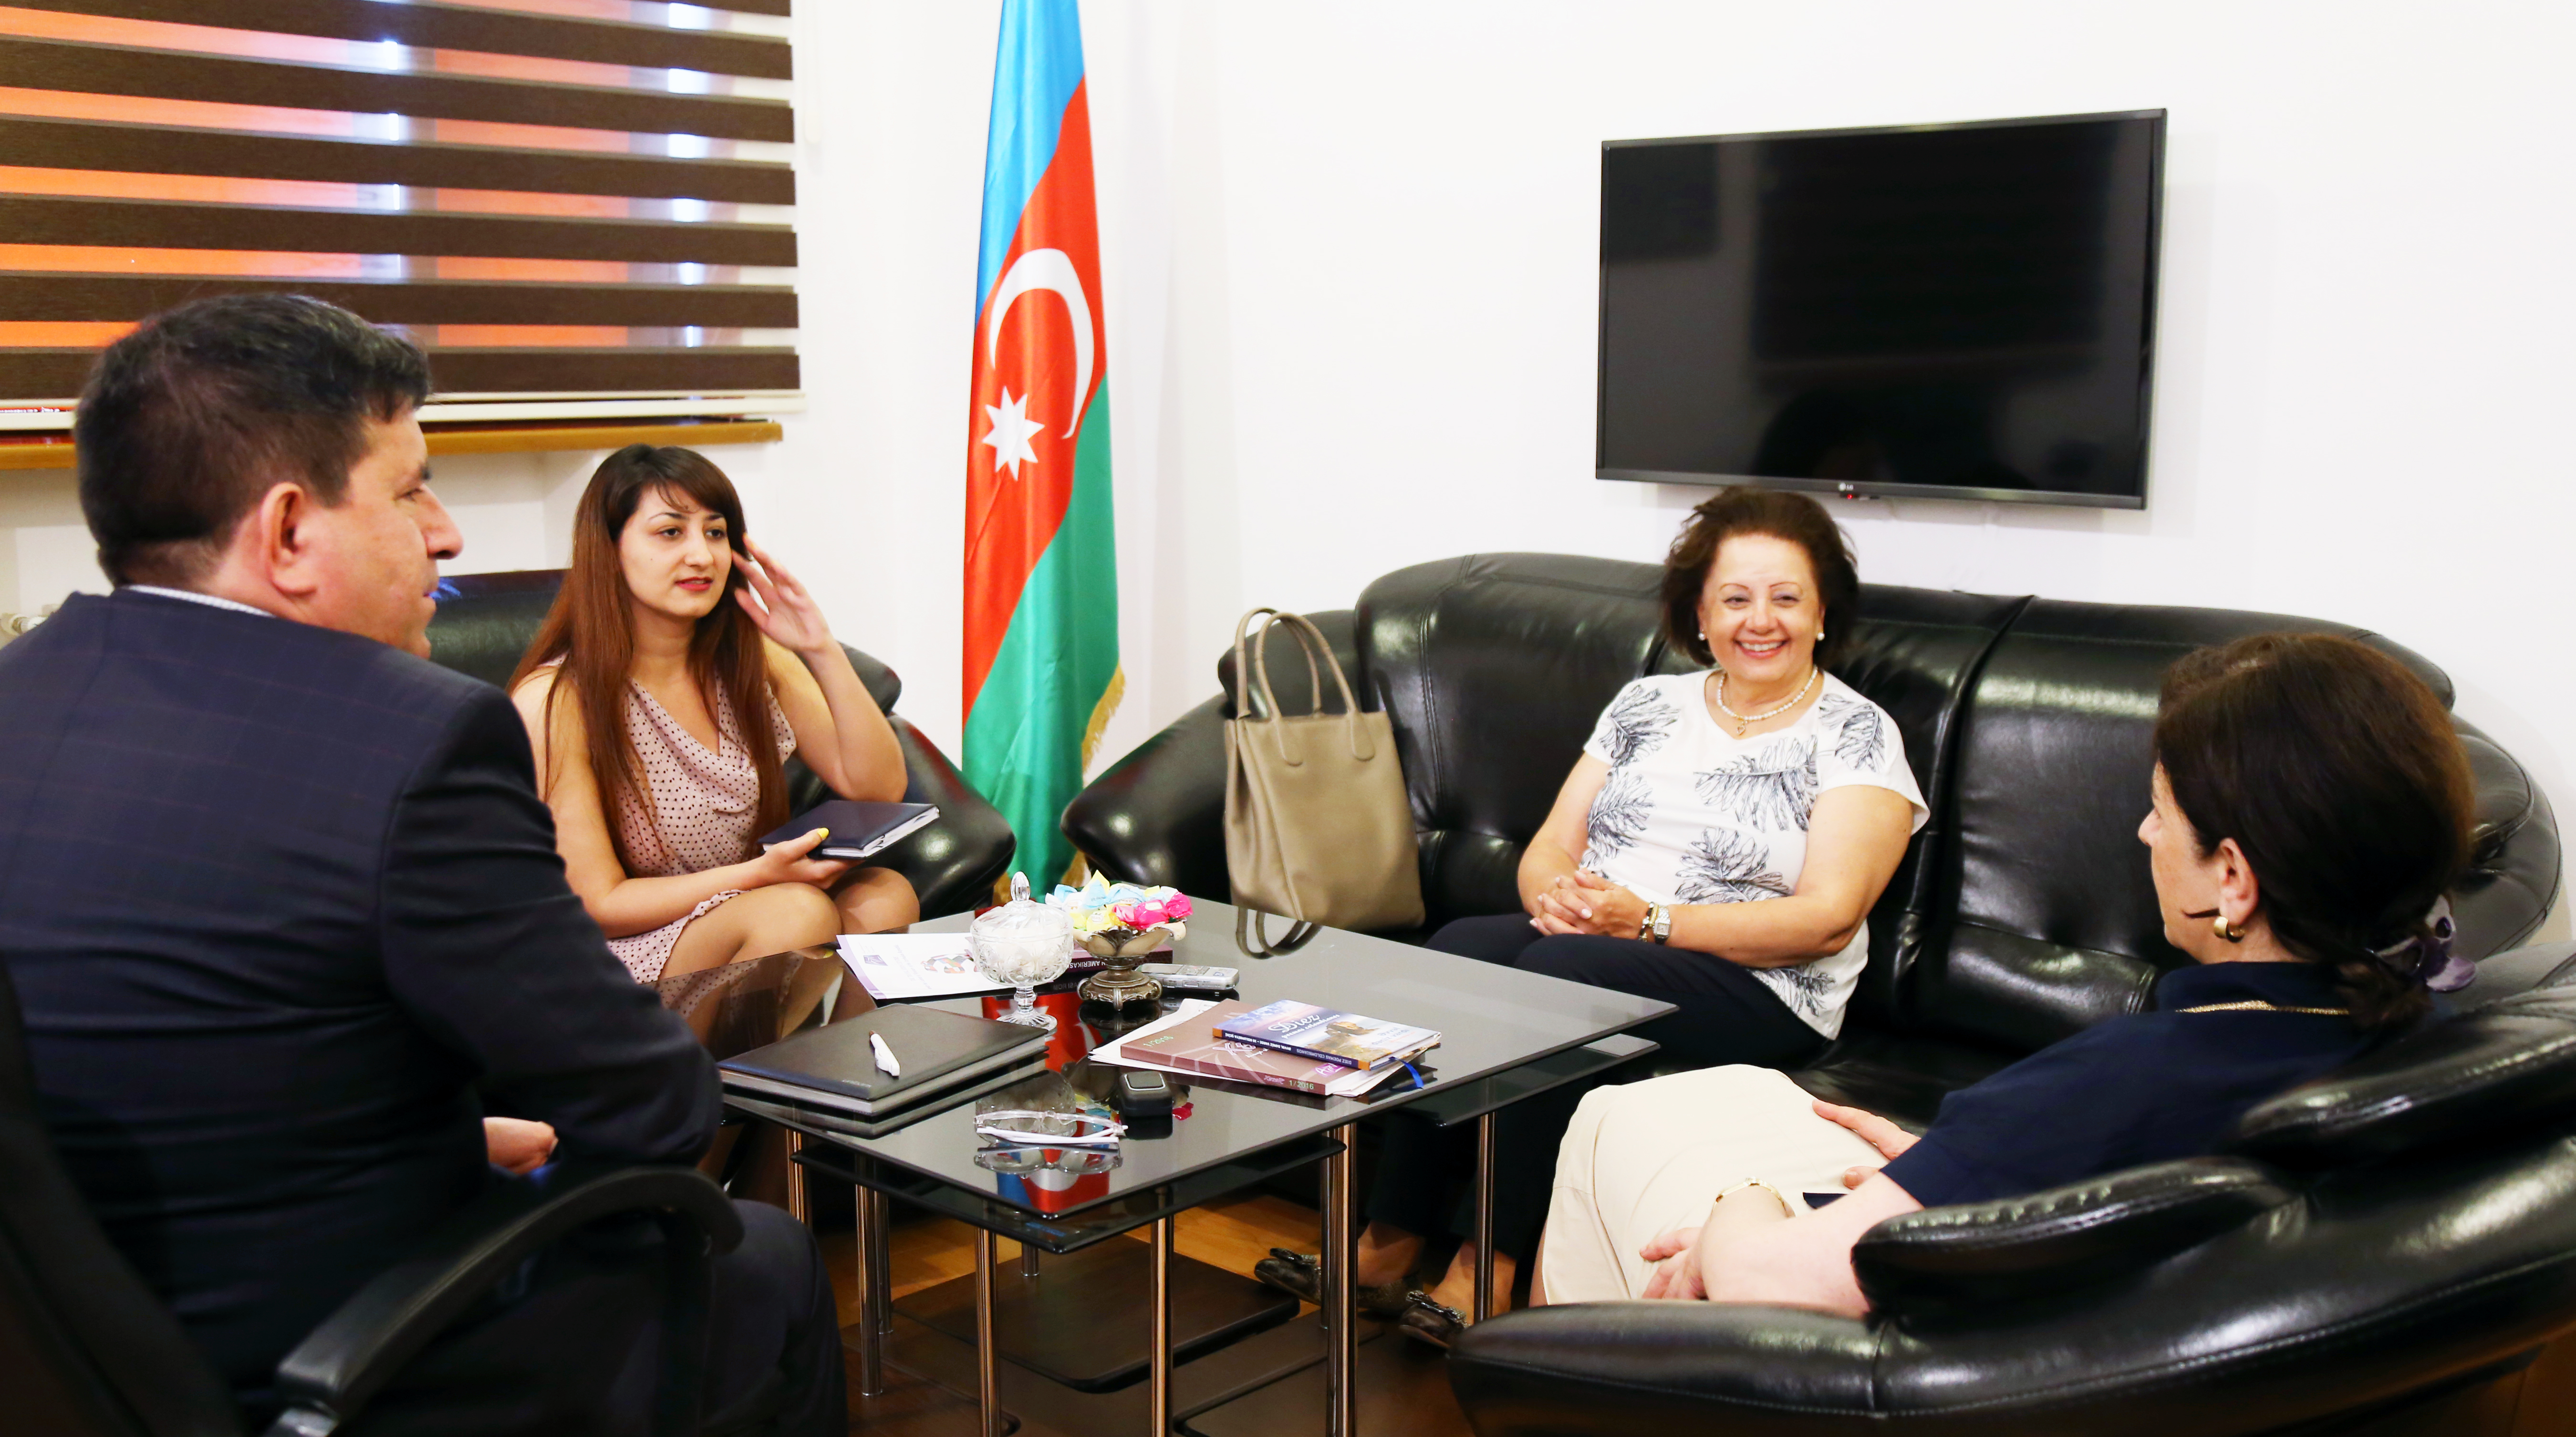 Azerbaijani poetry will be available for Colombians